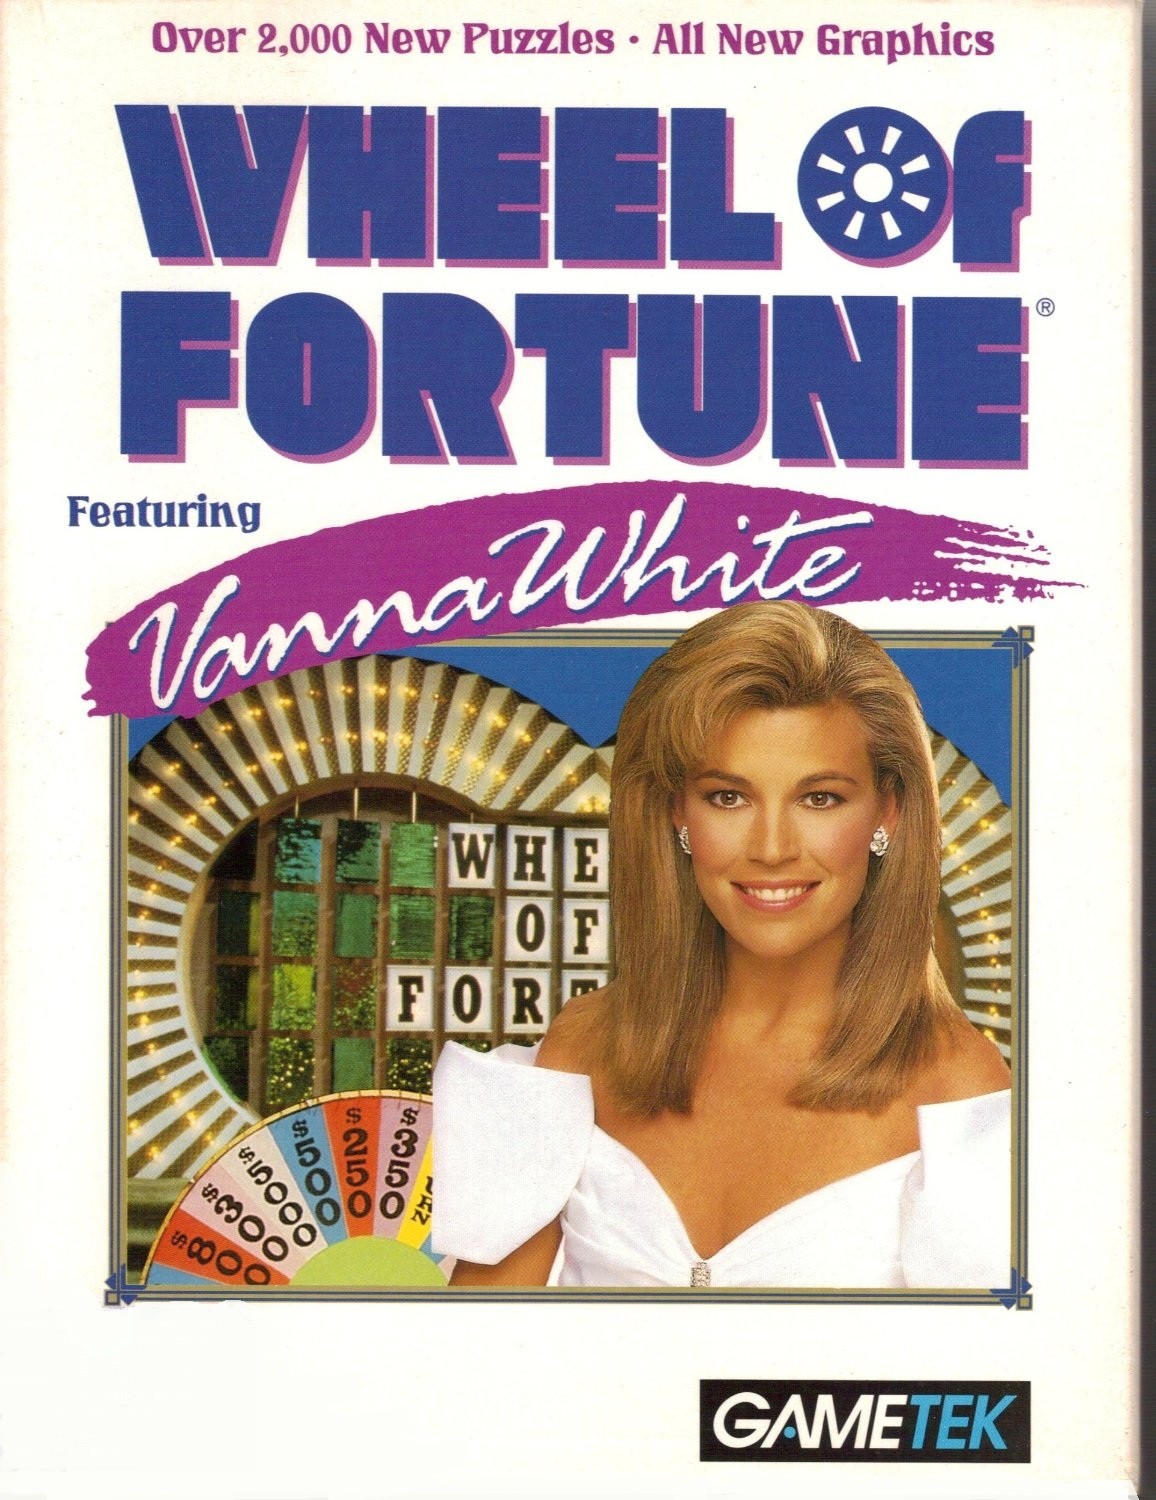 wheel of fortune nes game